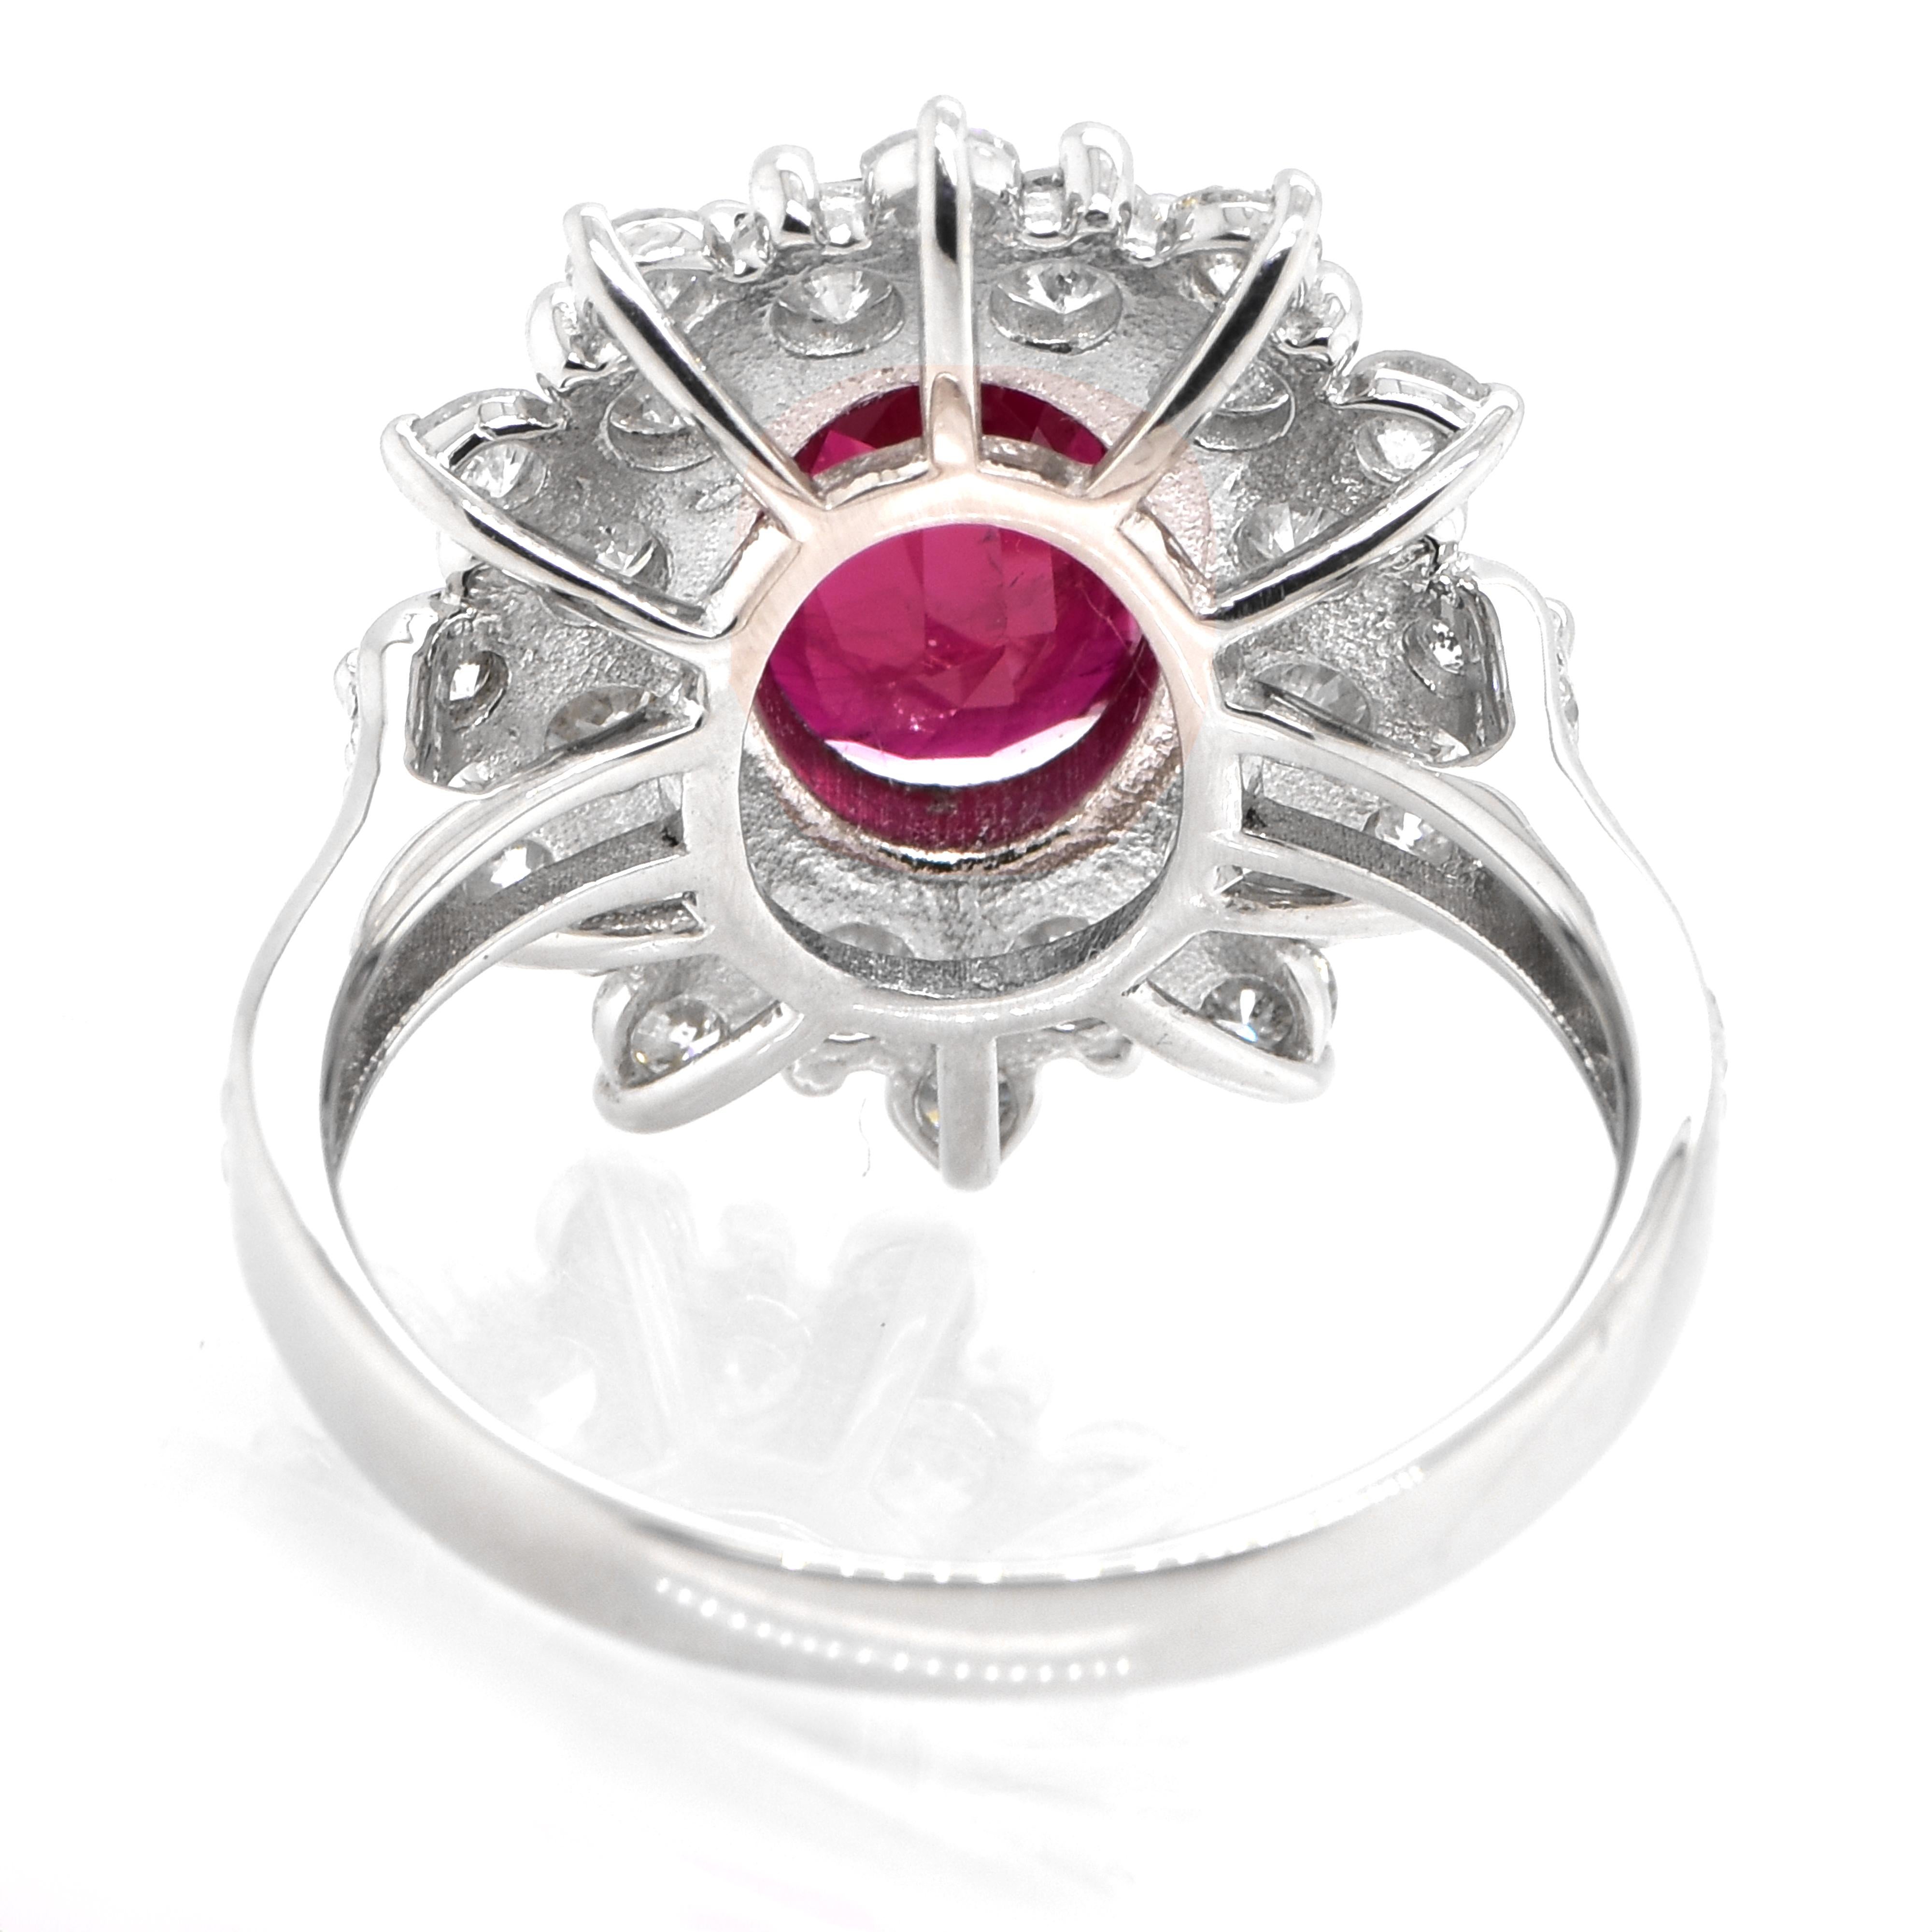 Women's GIA Certified 2.97 Carat Siam Ruby and Diamond Ring Made in Platinum For Sale